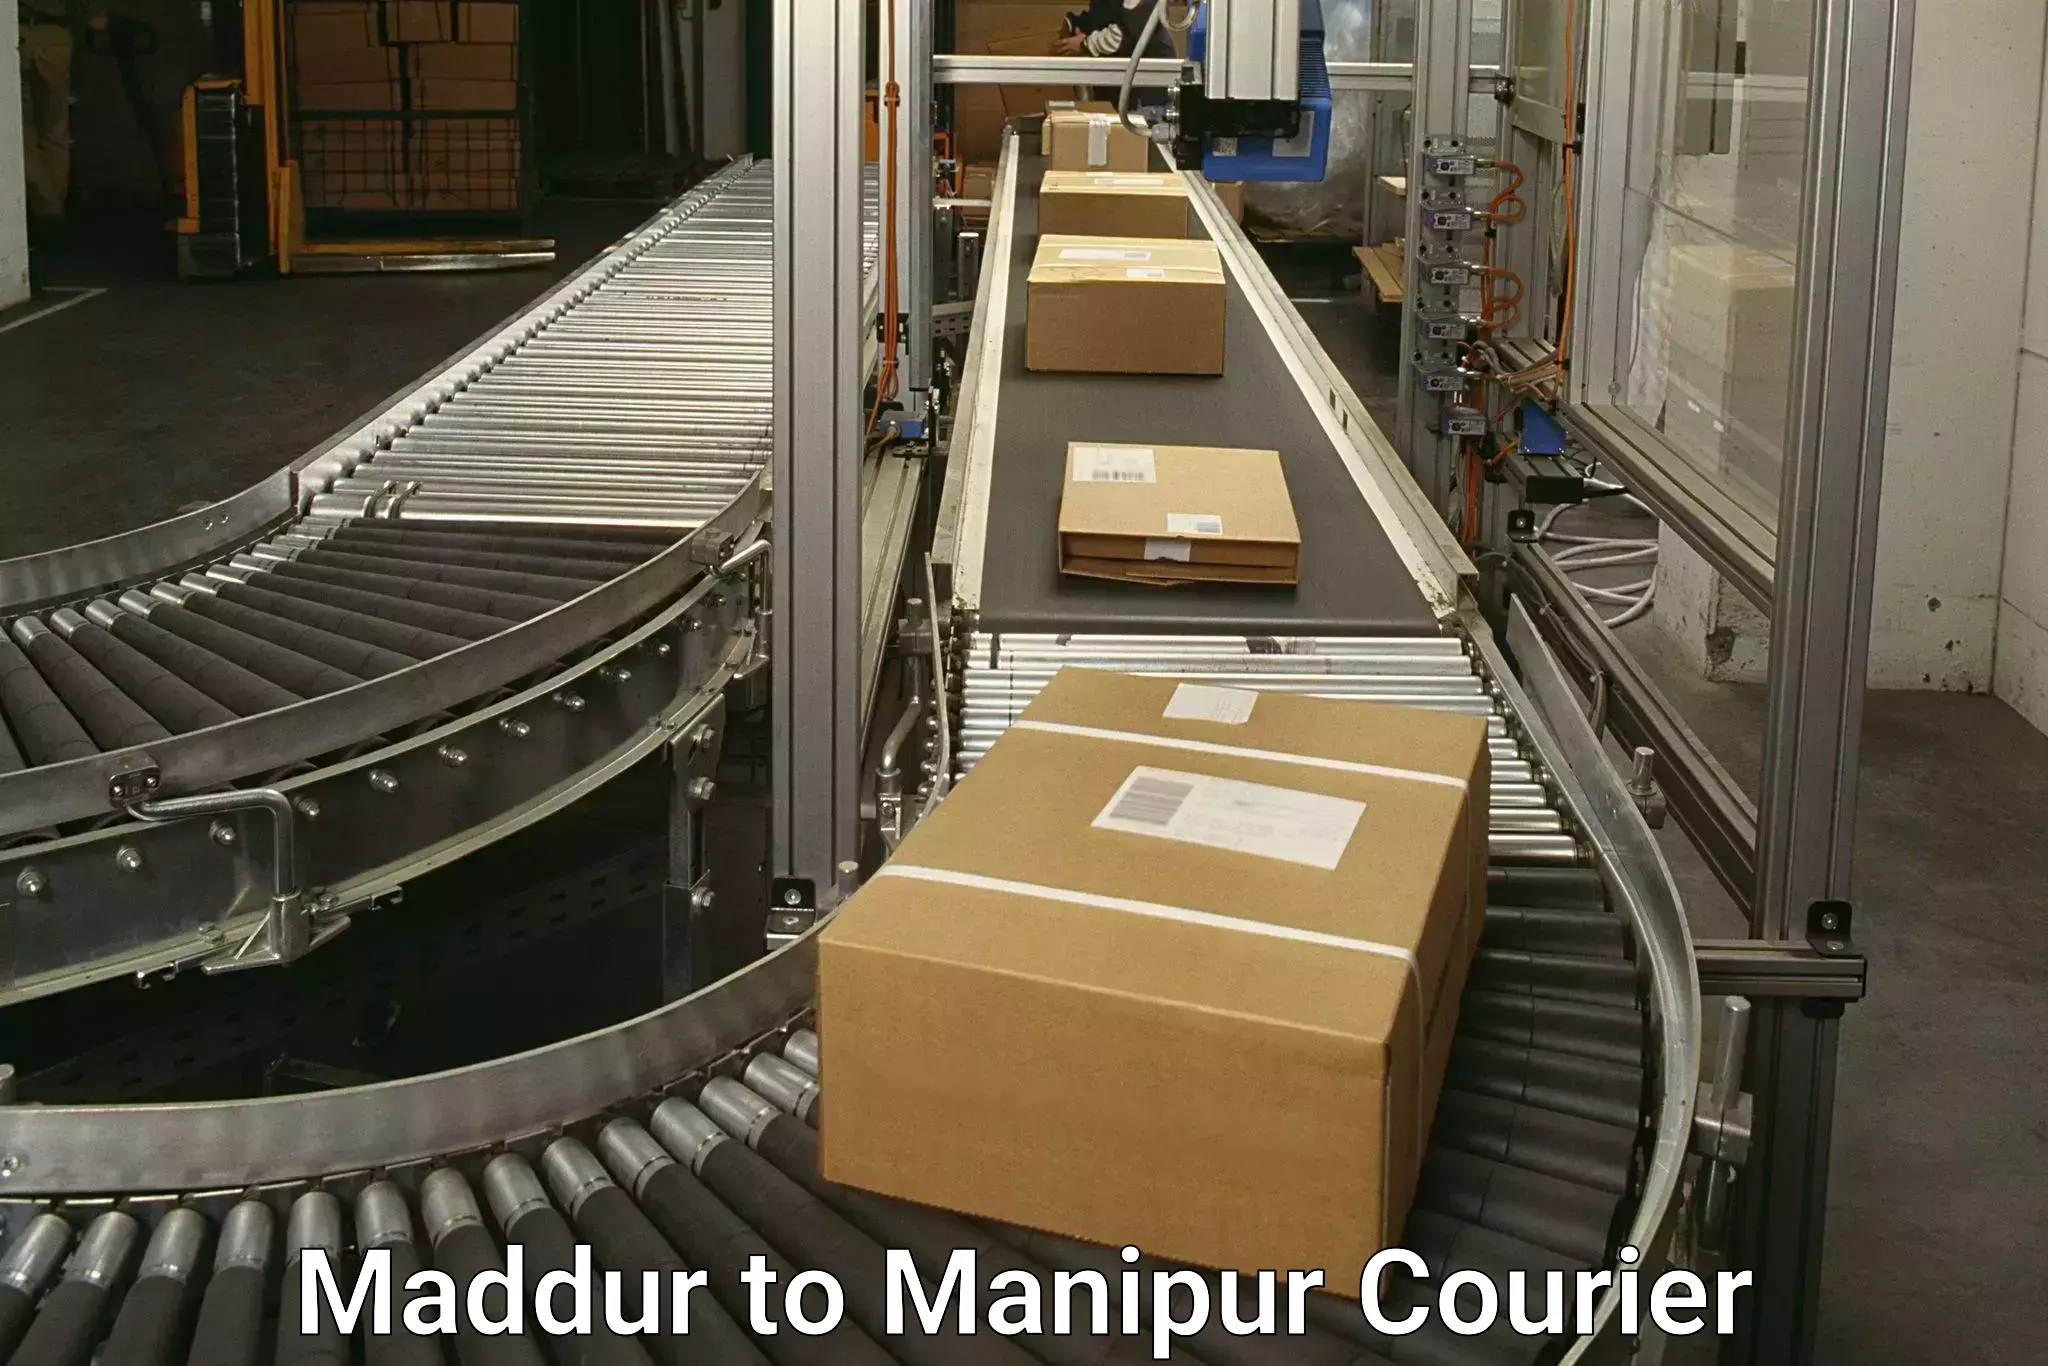 Efficient shipping operations in Maddur to Chandel